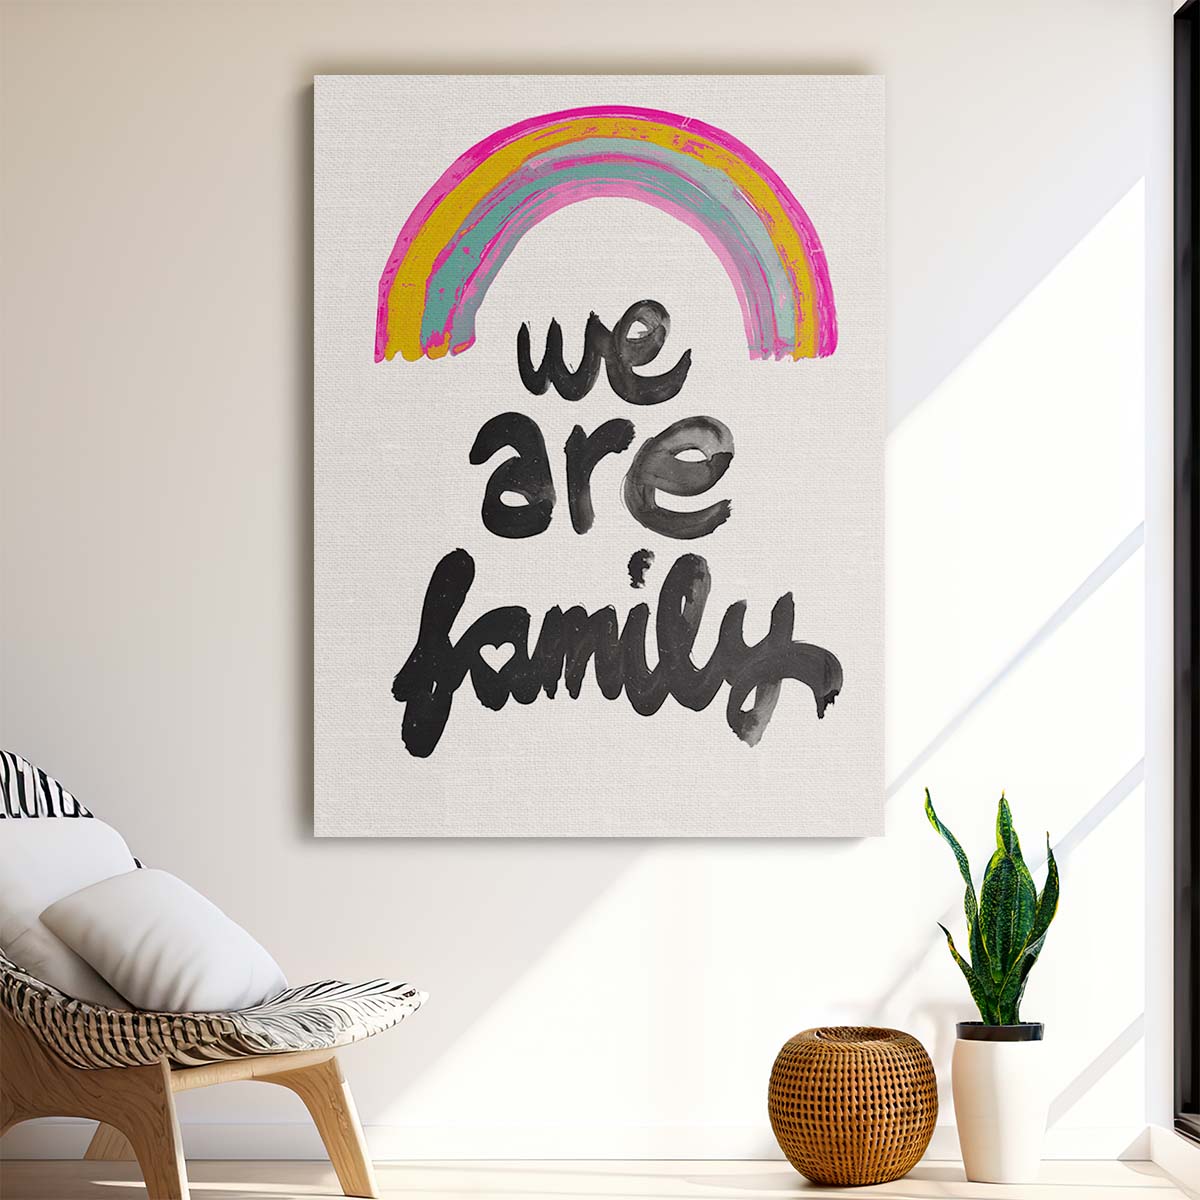 Colorful Family Love Quote Illustration by Treechild on White Background by Luxuriance Designs, made in USA